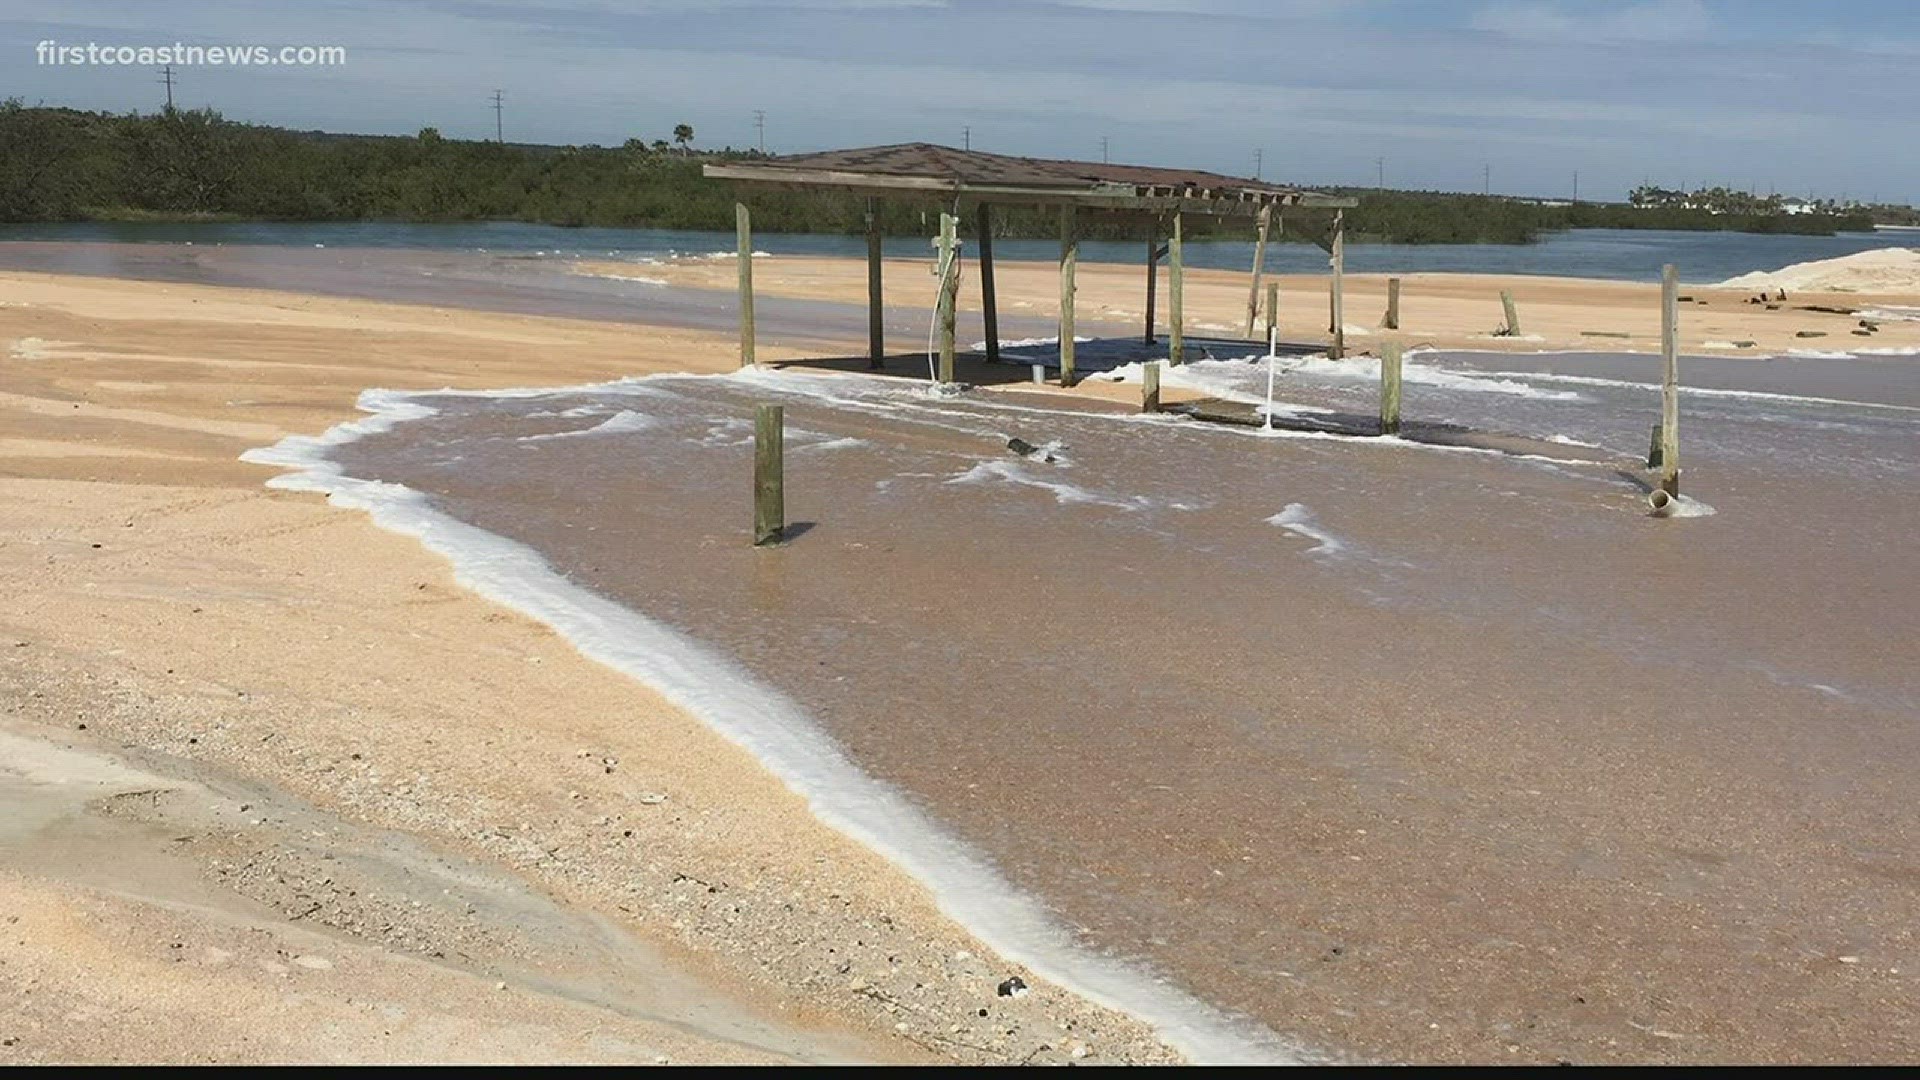 Over the weekend, there was a breach in the dunes in Summer Haven in Southern St. Johns County.